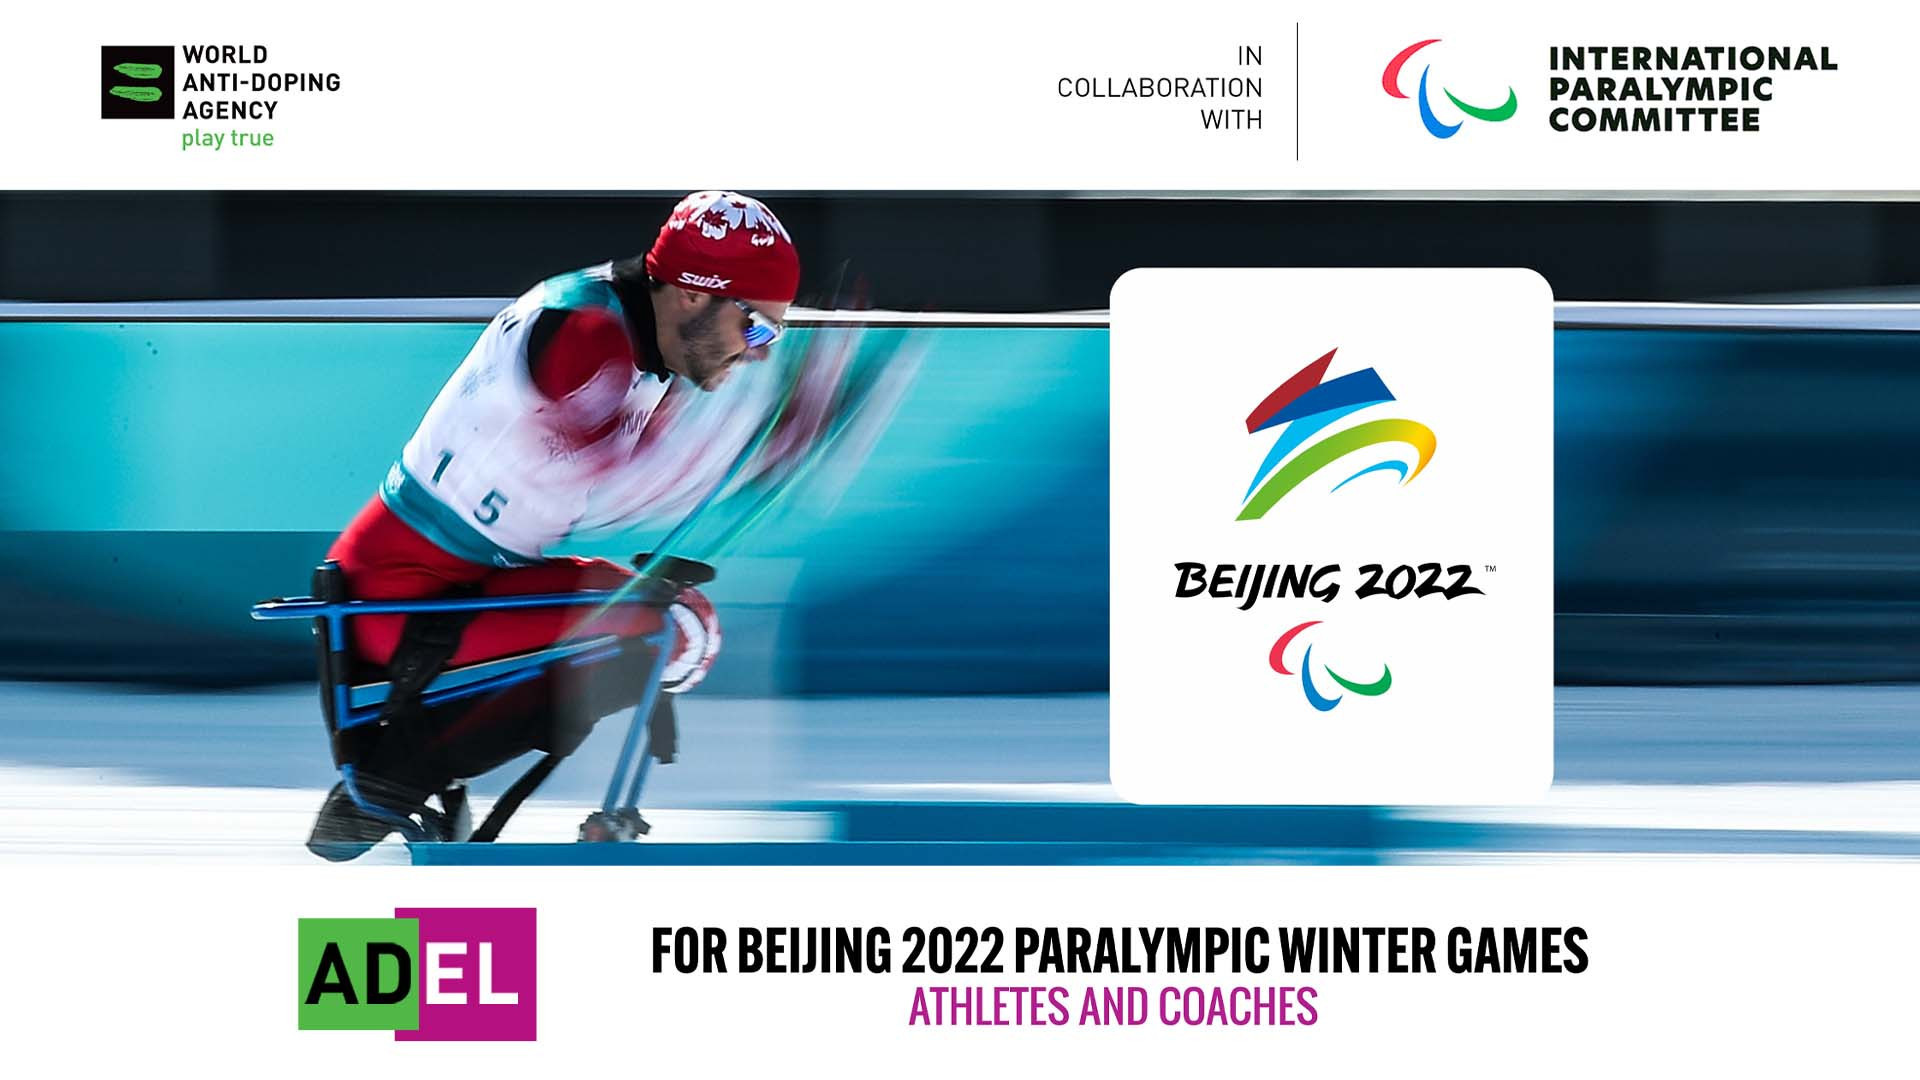 WADA launches education course prior to Beijing 2022 Paralympic Winter Games